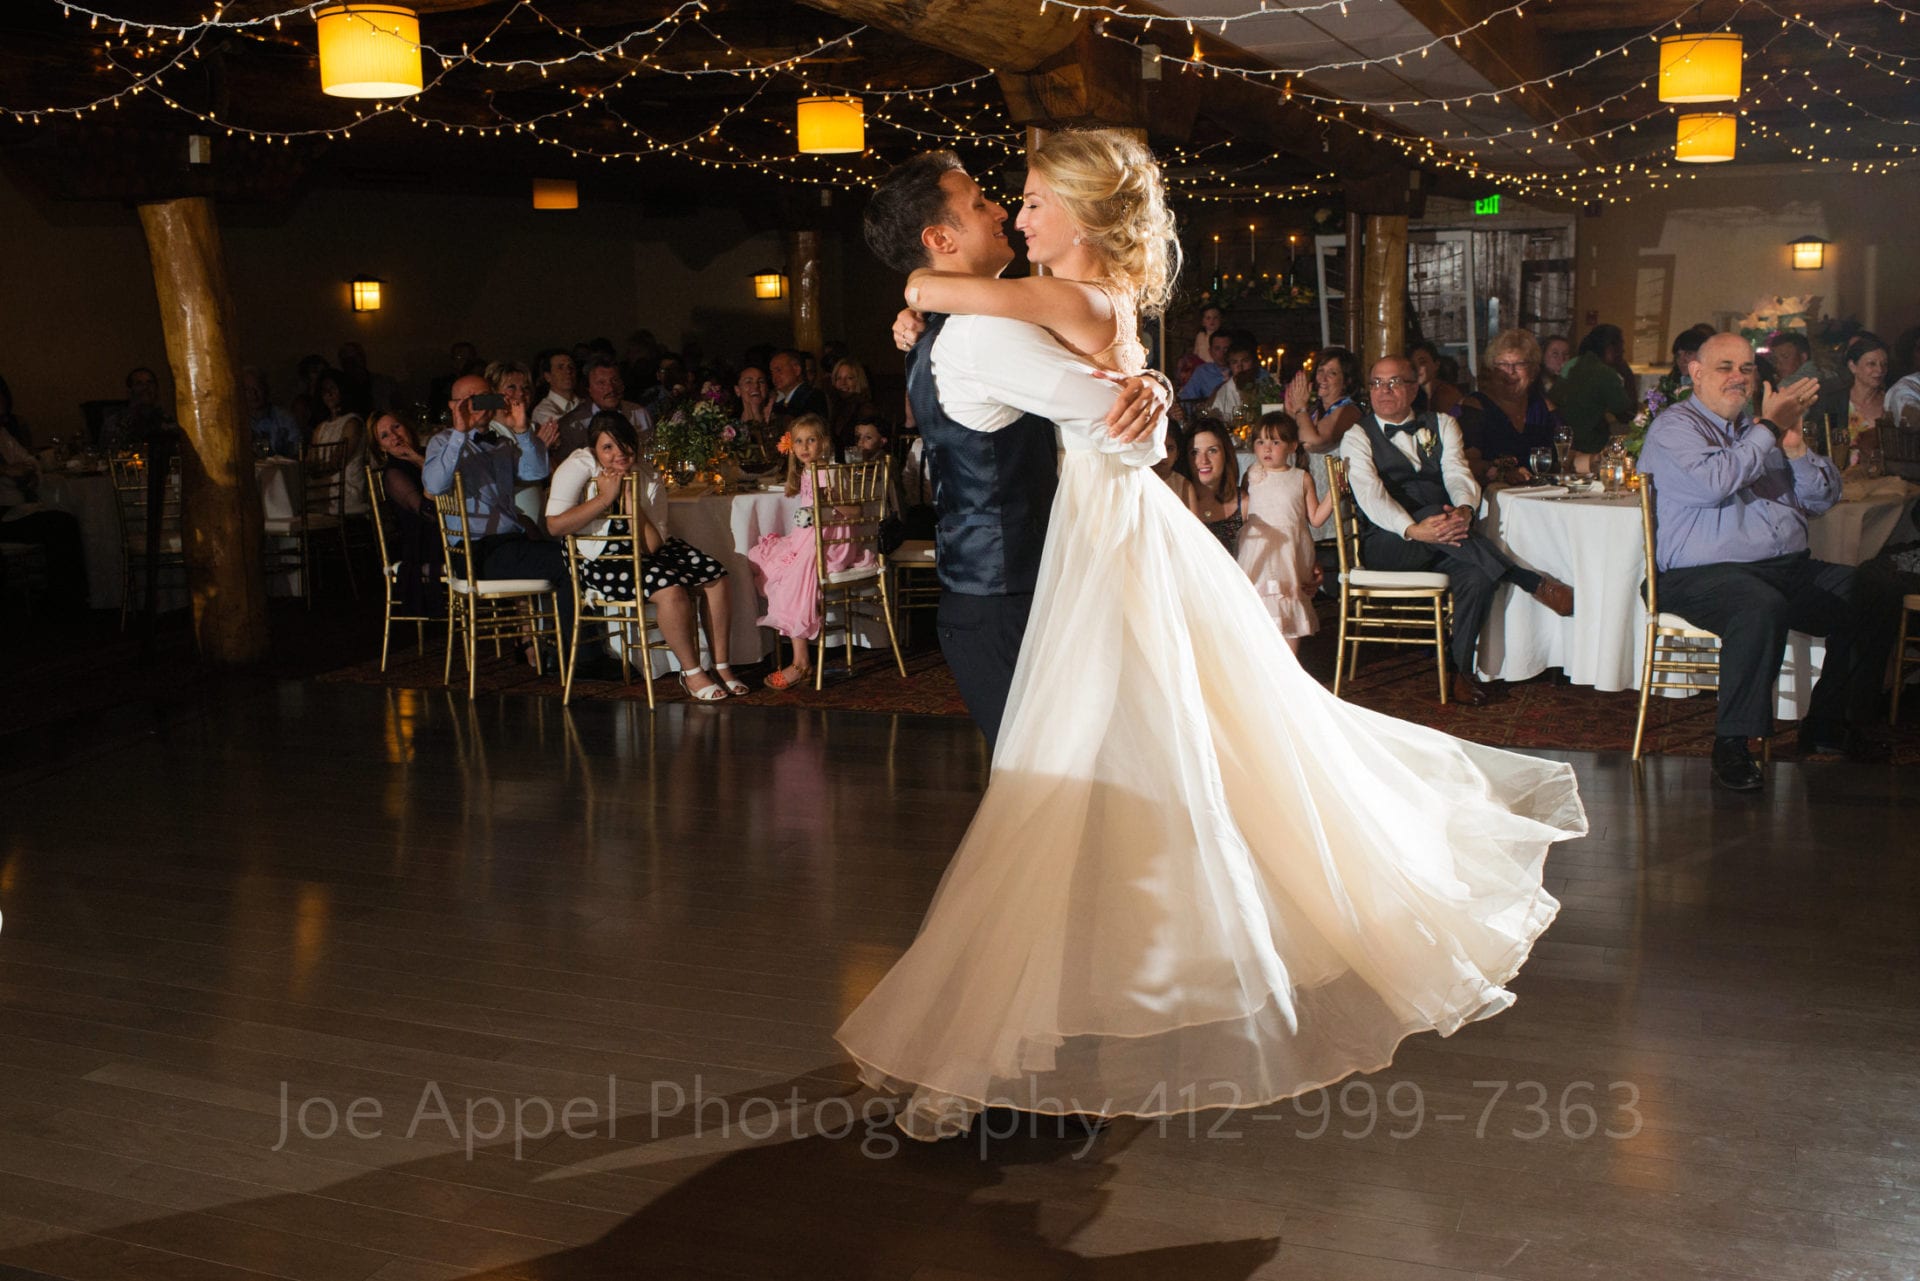 a groom picks his bride up on a dance floor with yellow lights Seven Springs Weddings